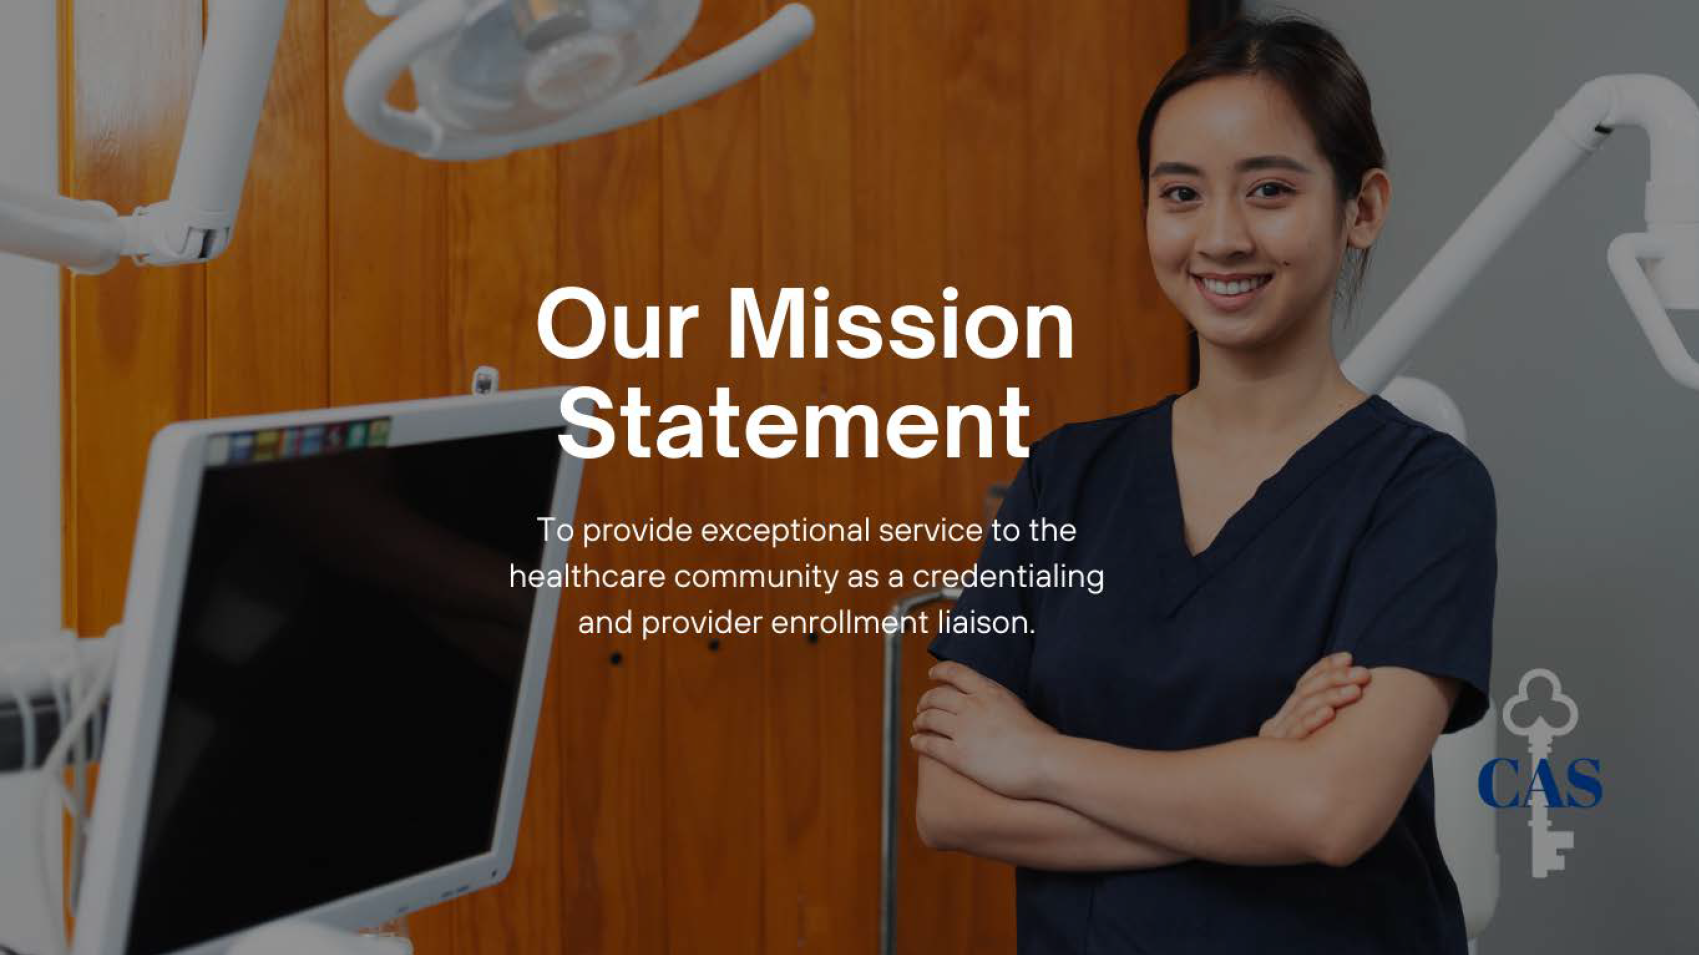 OUR MISSION STATEMENT: 
                To provide exceptional service to the healthcare community as a credentialing 
                and provider enrollment liaison.